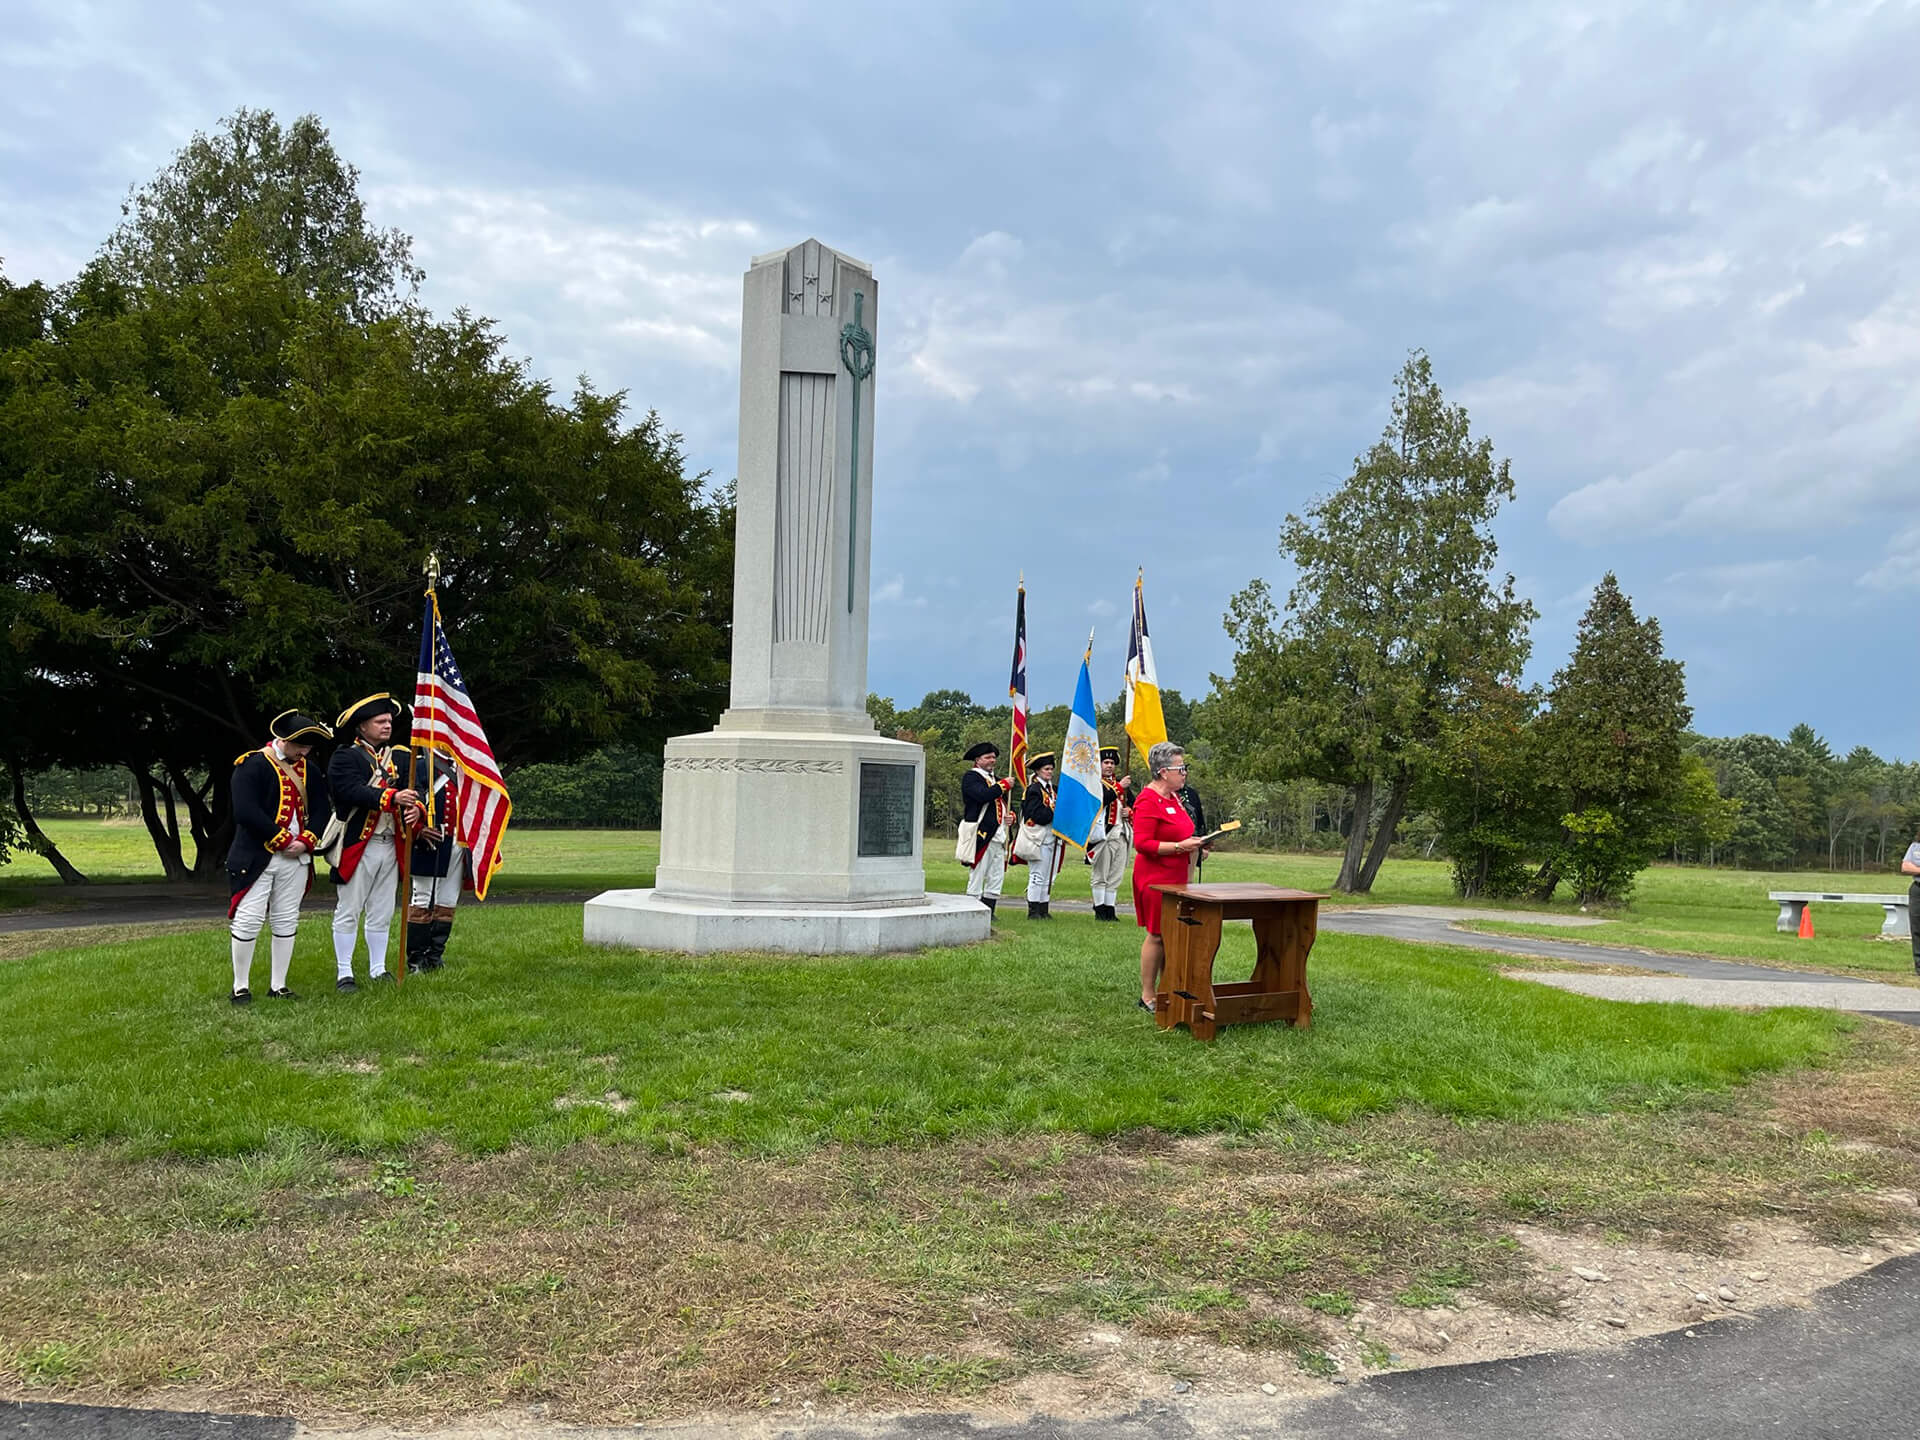 Revolutionary War reenactors with flags near a monument as a woman speaks at a podium